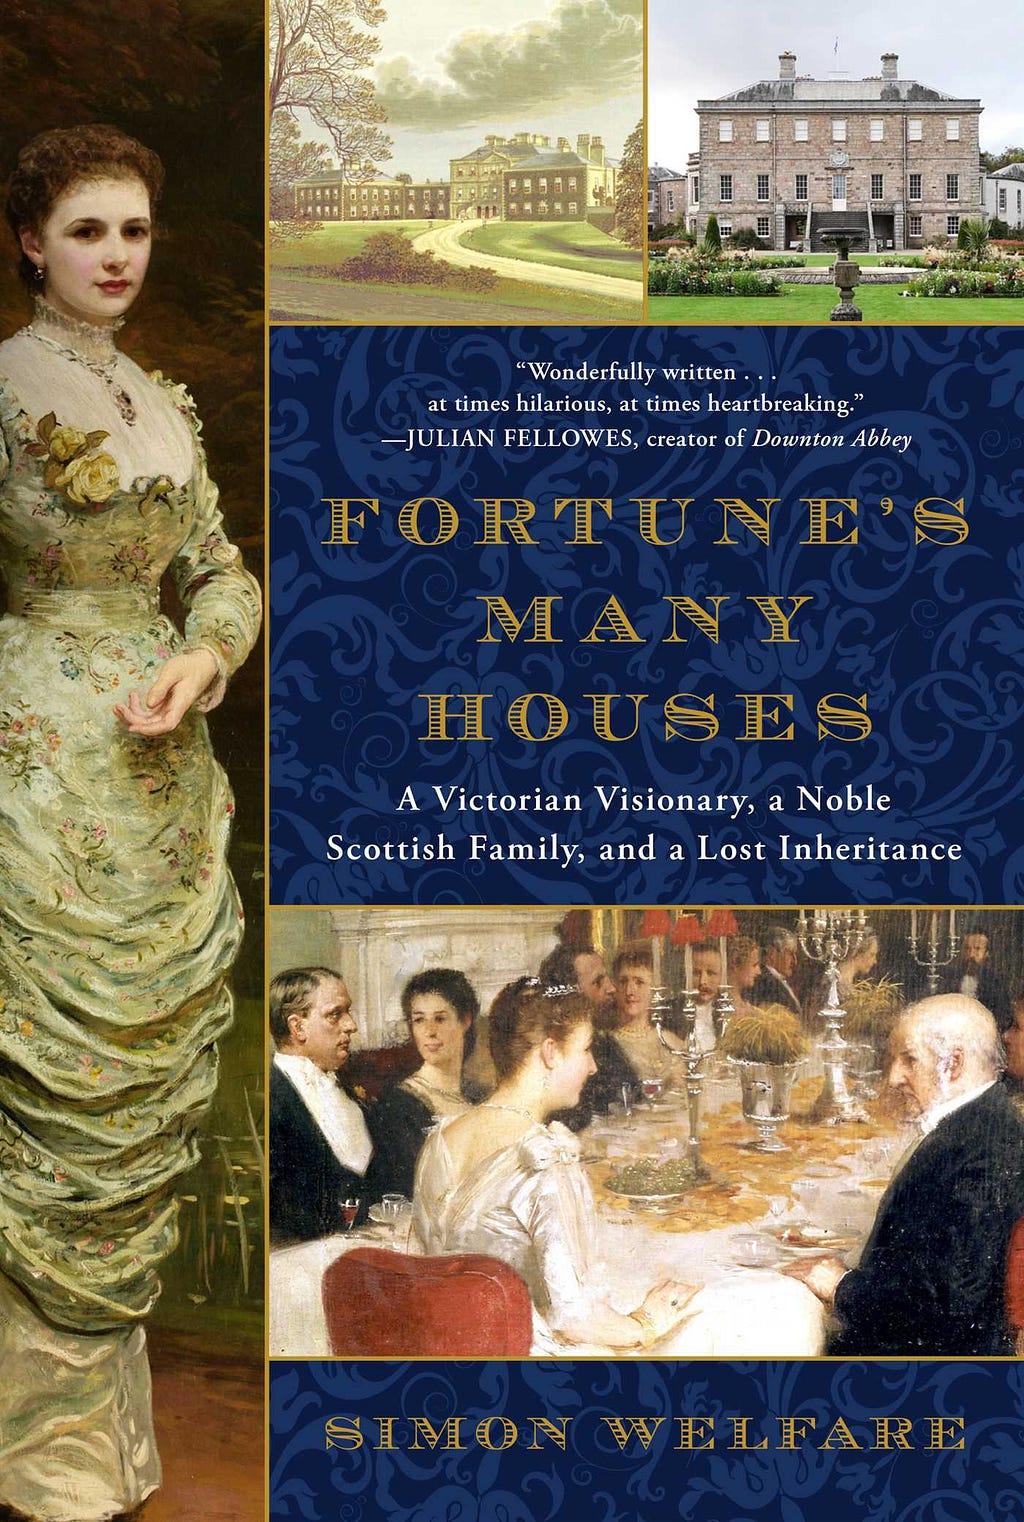 PDF Fortune's Many Houses: A Victorian Visionary, a Noble Scottish Family, and a Lost Inheritance By Simon Welfare